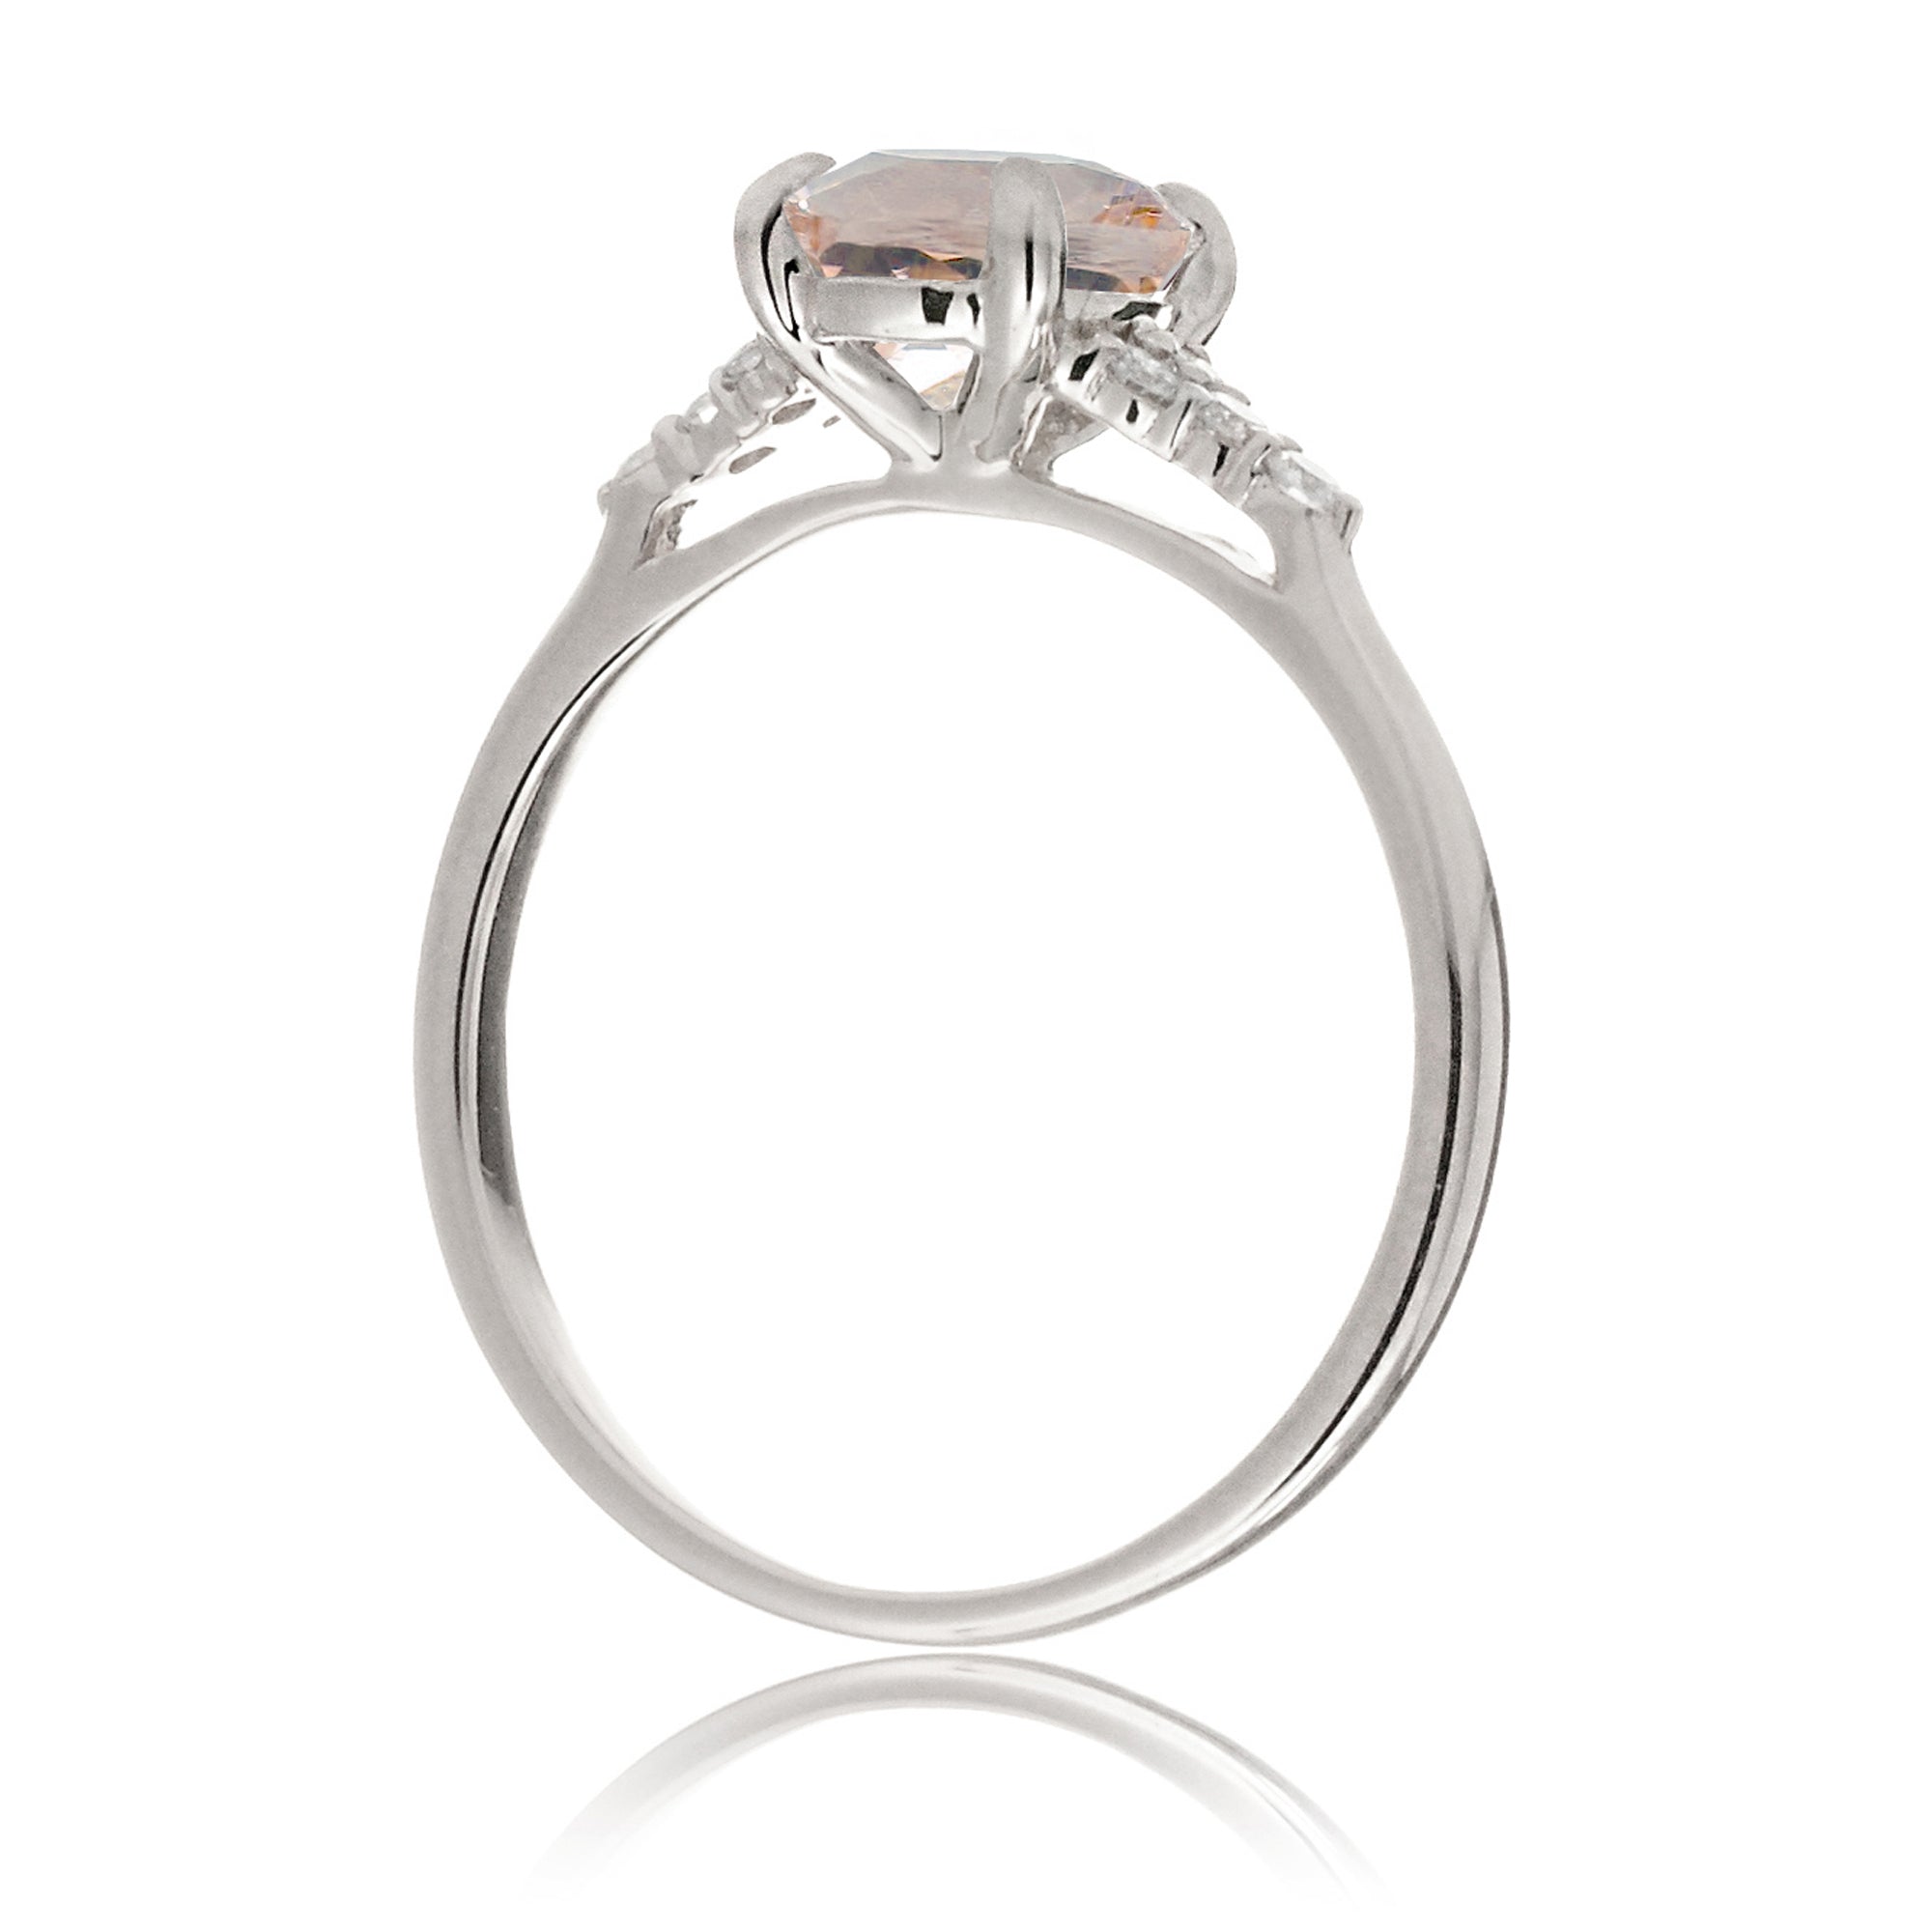 Pear cut natural morganite and diamond engagement ring in white gold - the Chloe